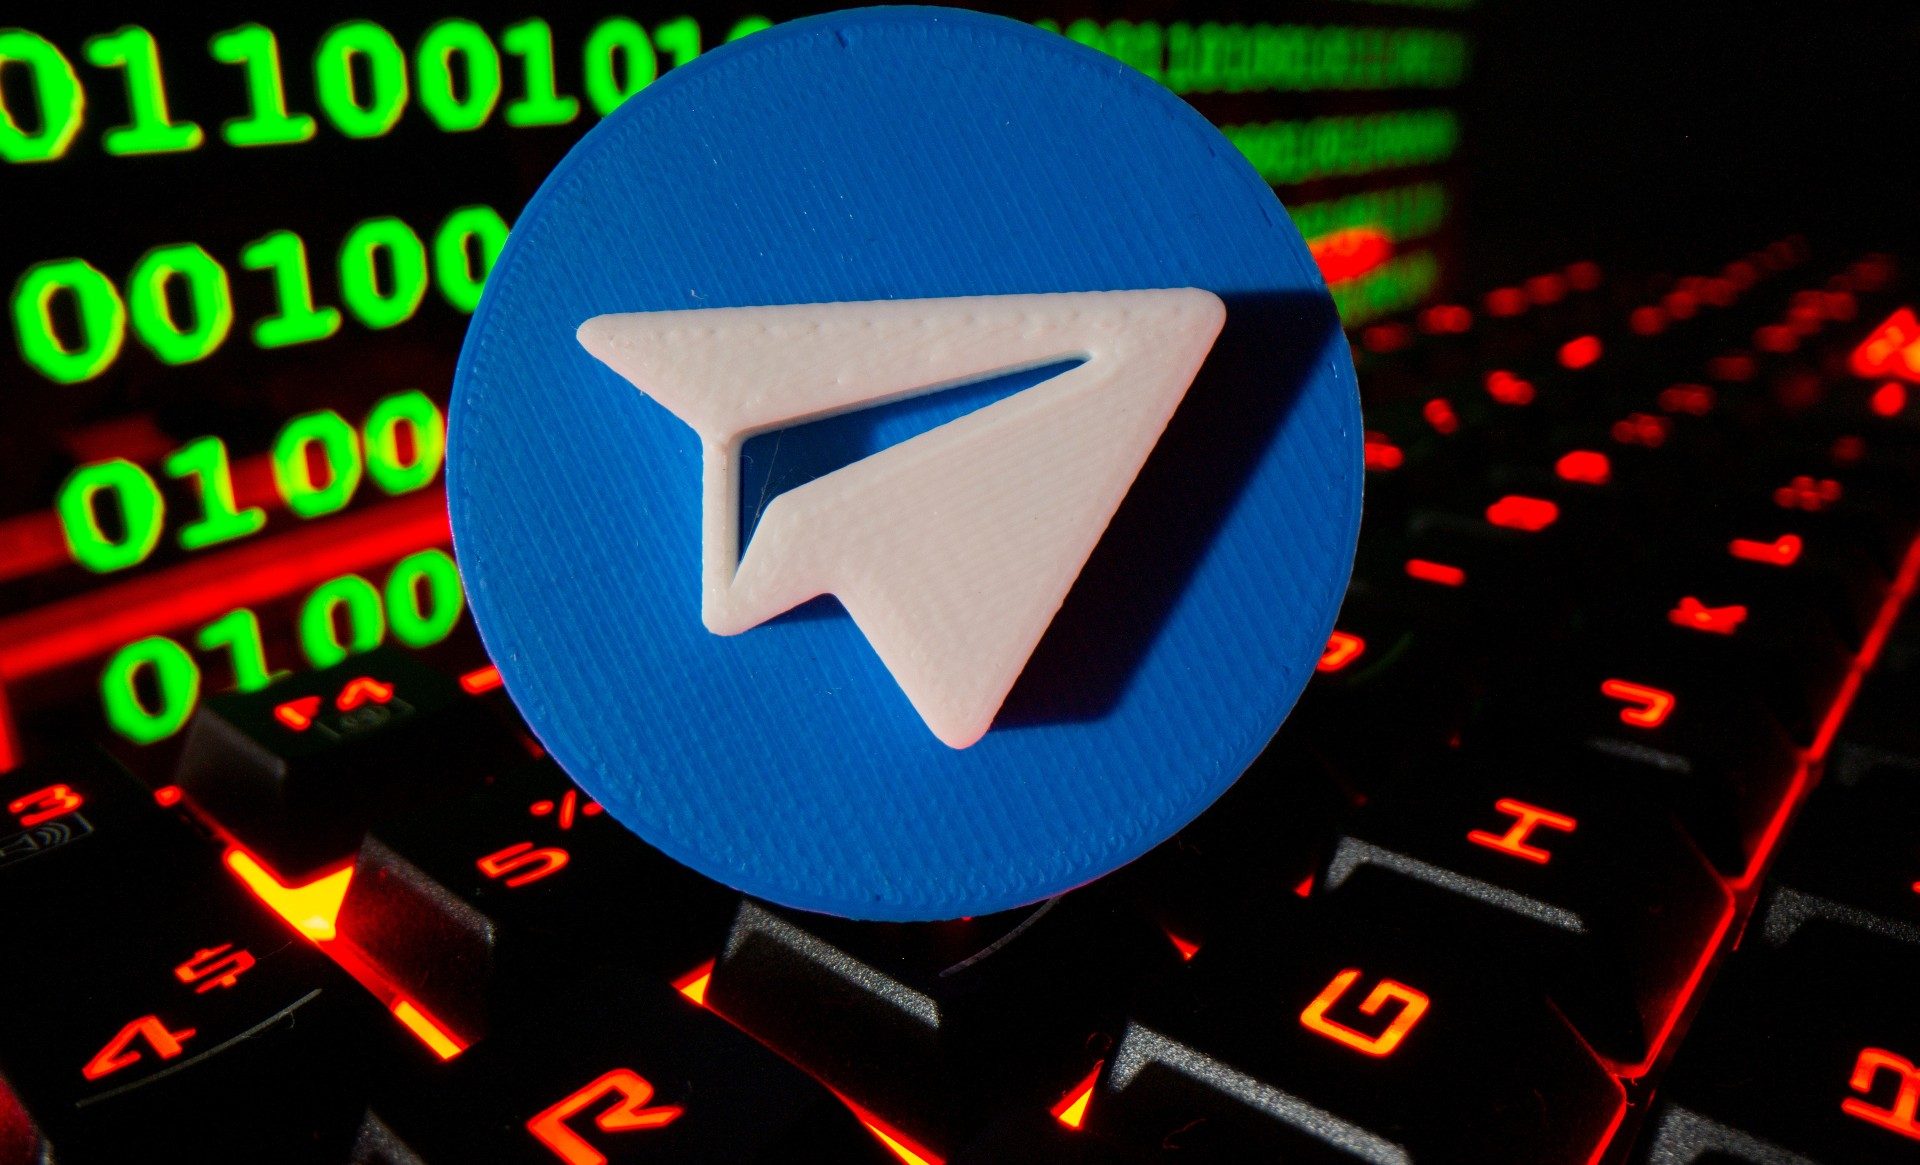 Telegram founder says over 70M new users joined during Facebook outage